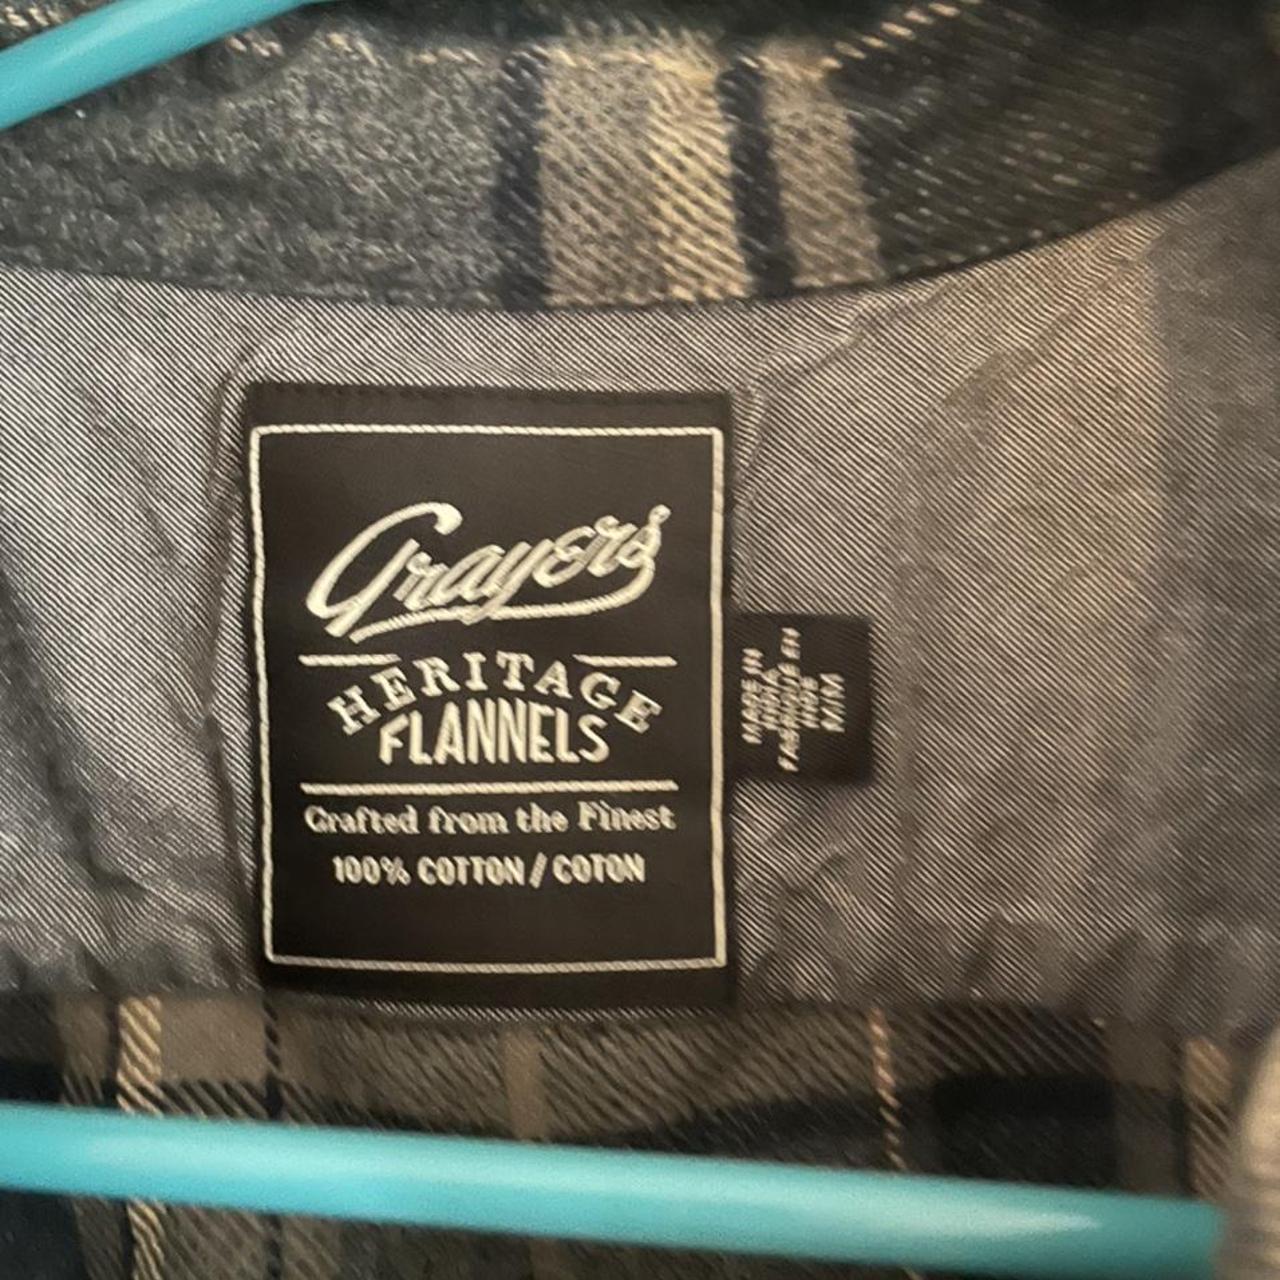 Product Image 2 - Grayers flannel. Brand new, never